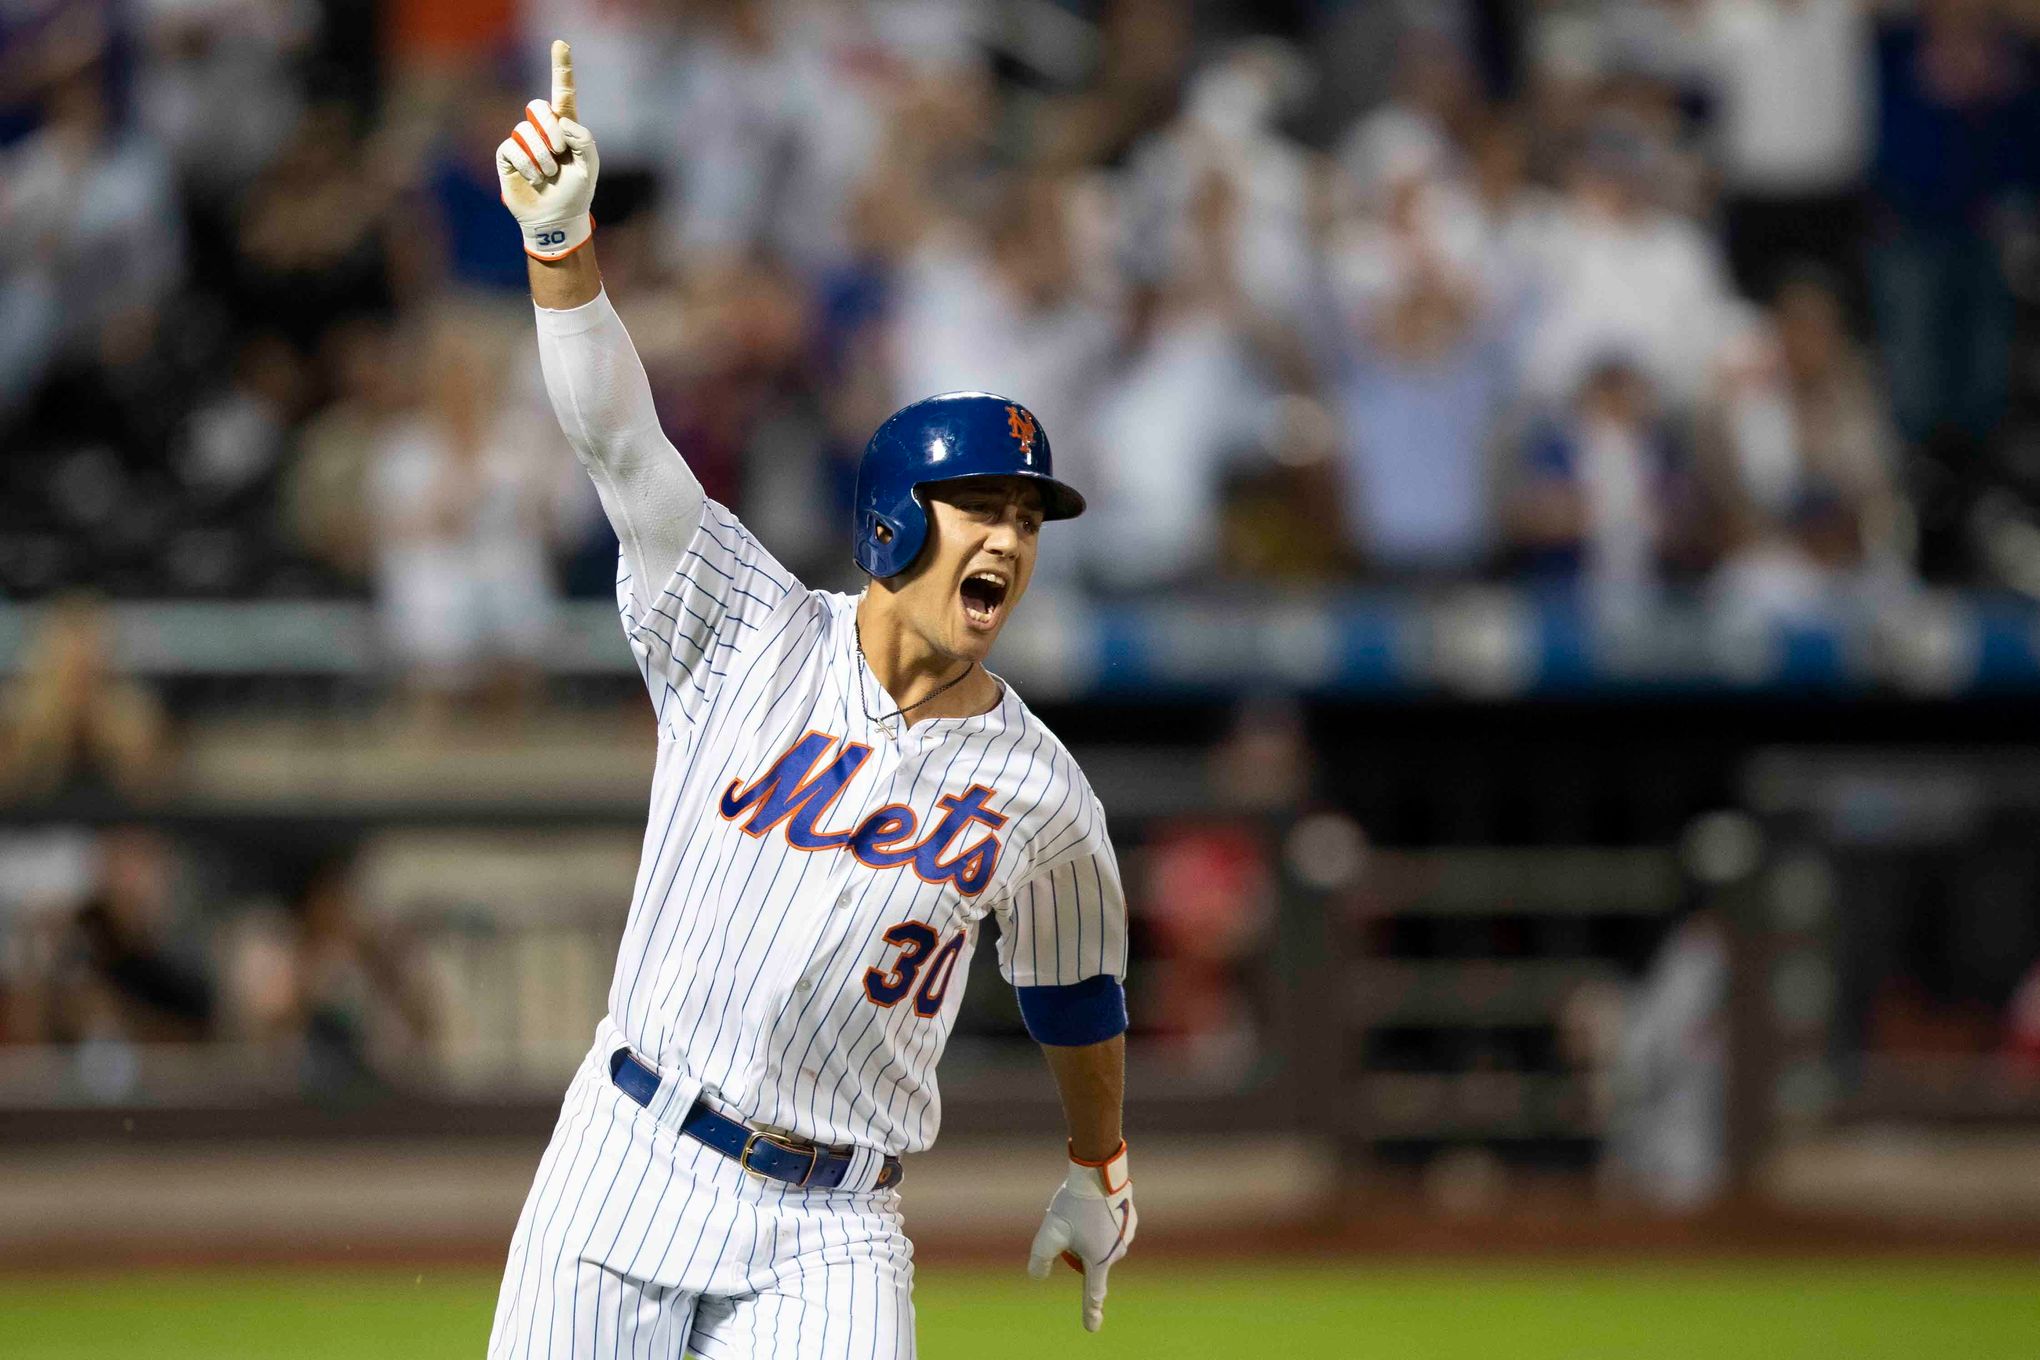 Kelly Johnson's homer in 11th lifts Mets over Braves